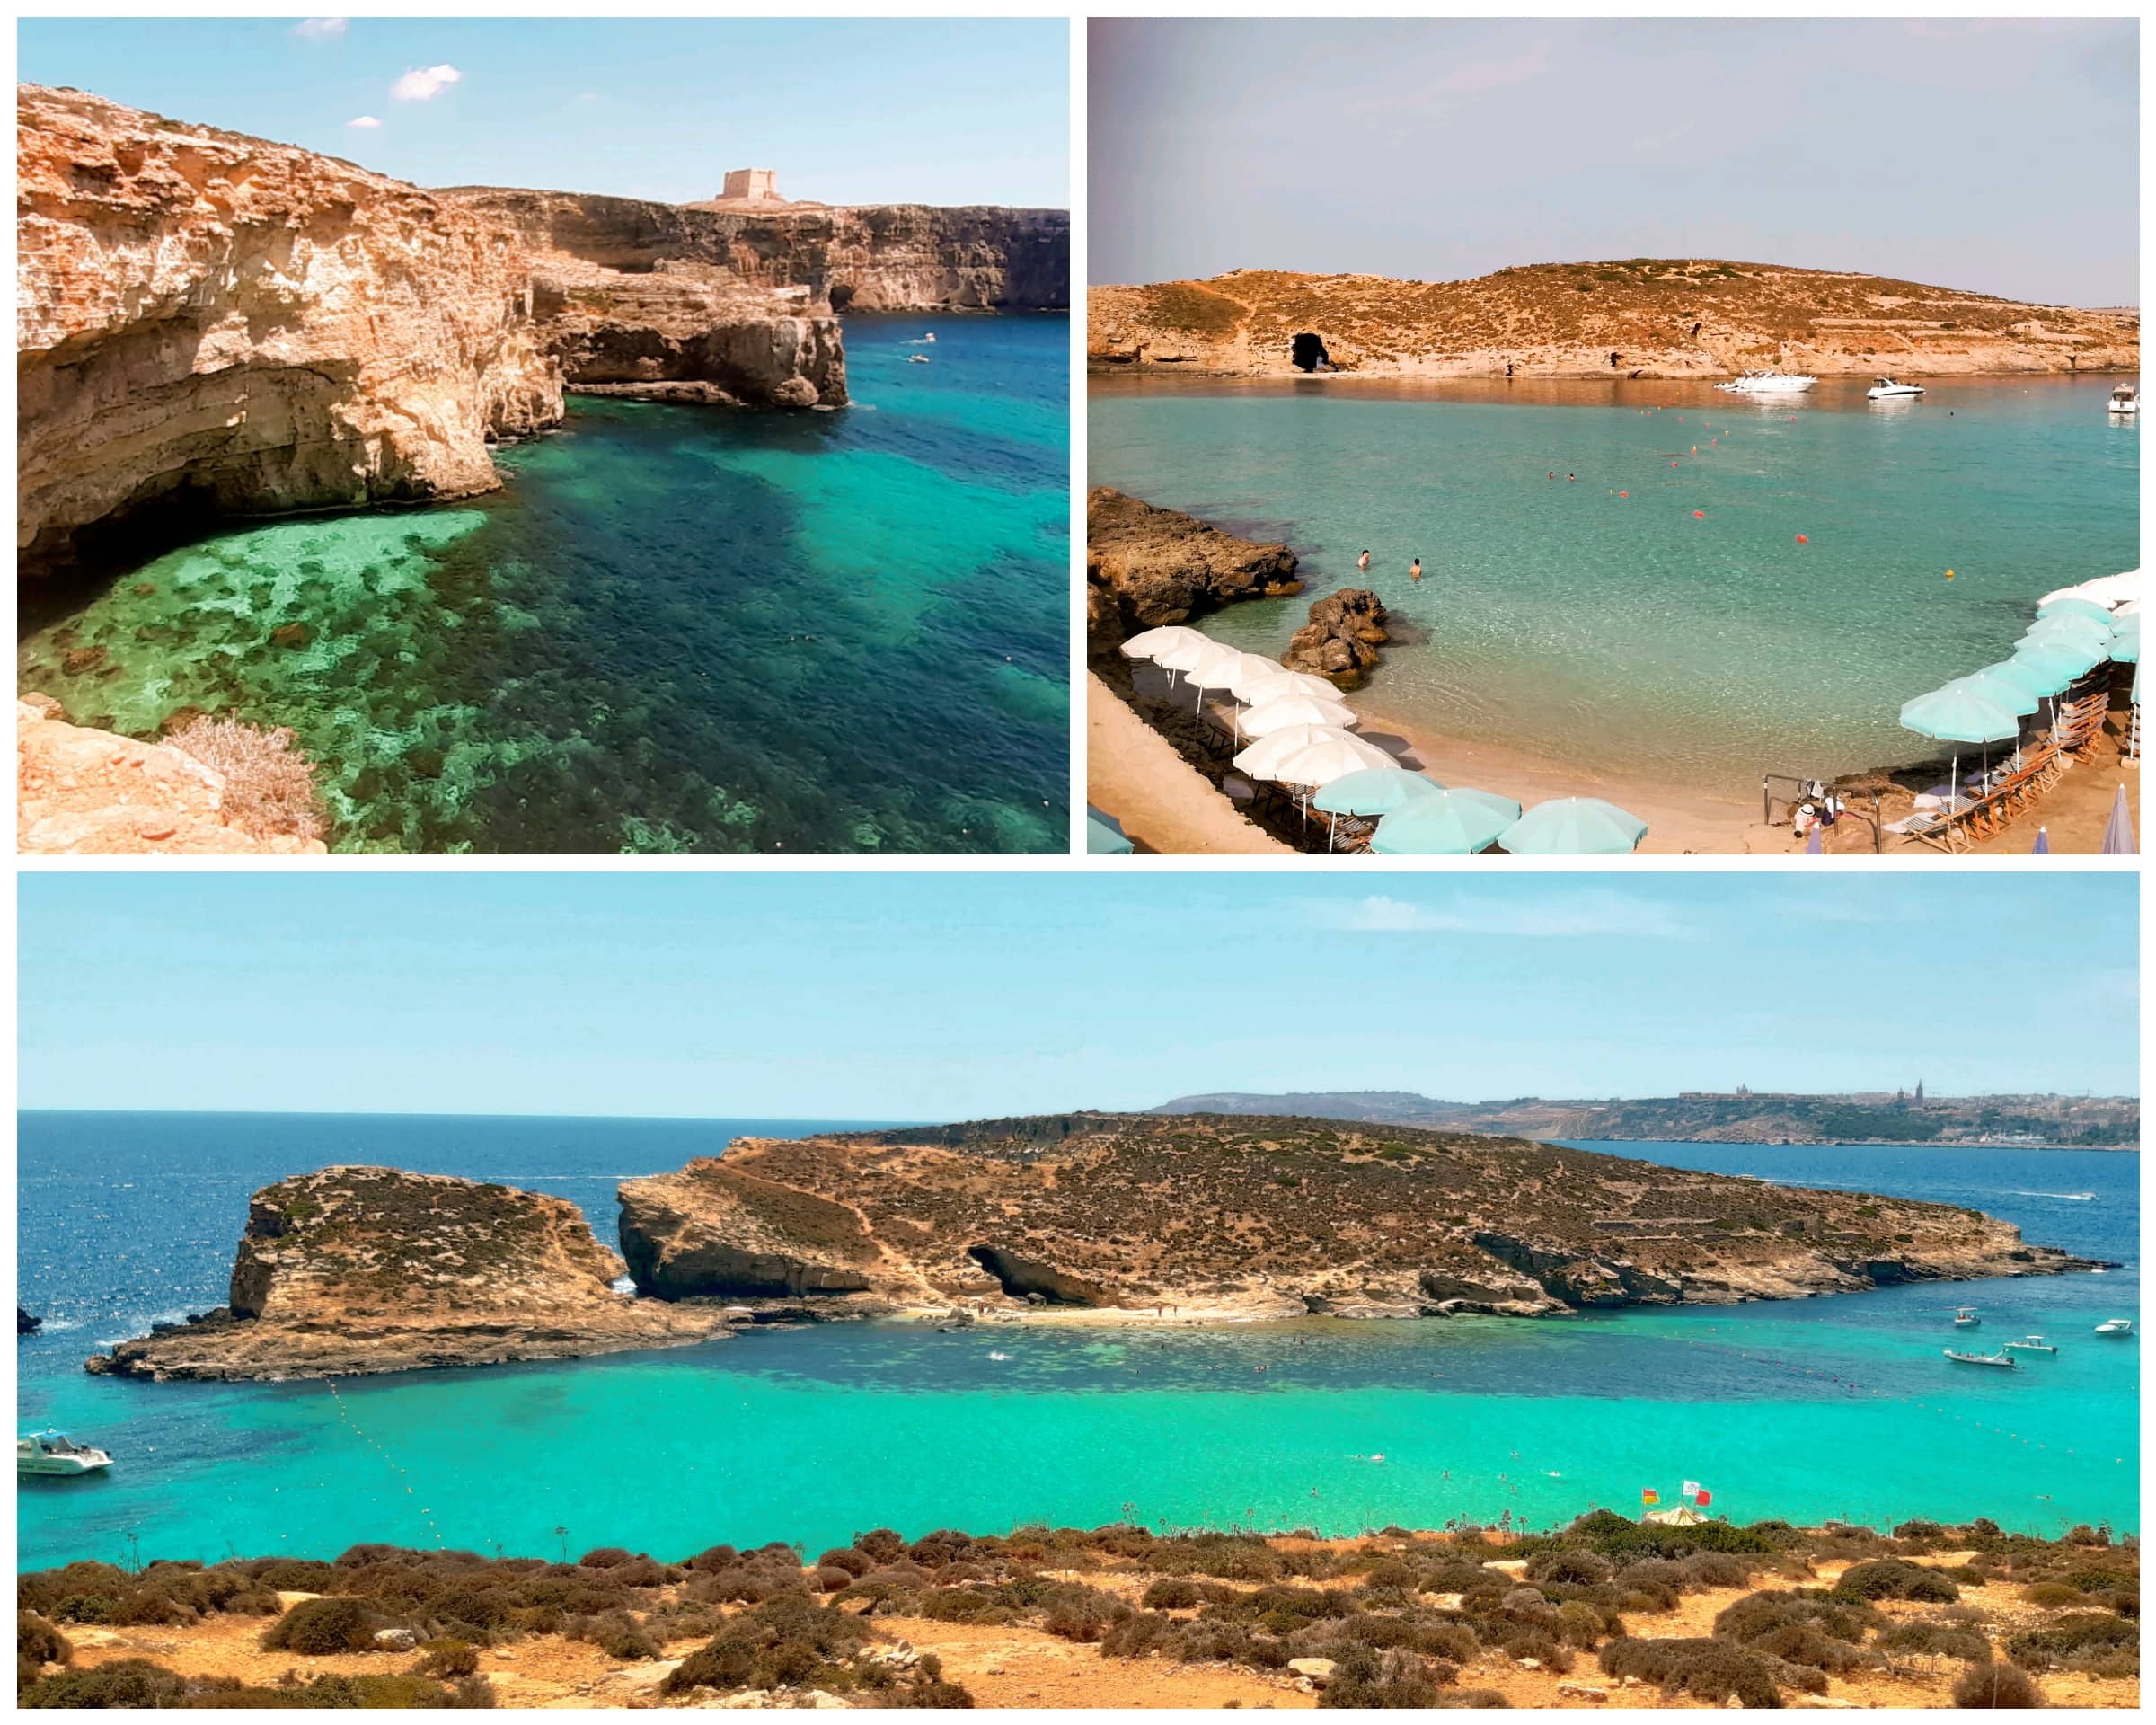 Stay in Malta - visit Comino, the Blue Lagoon and its turquoise waters